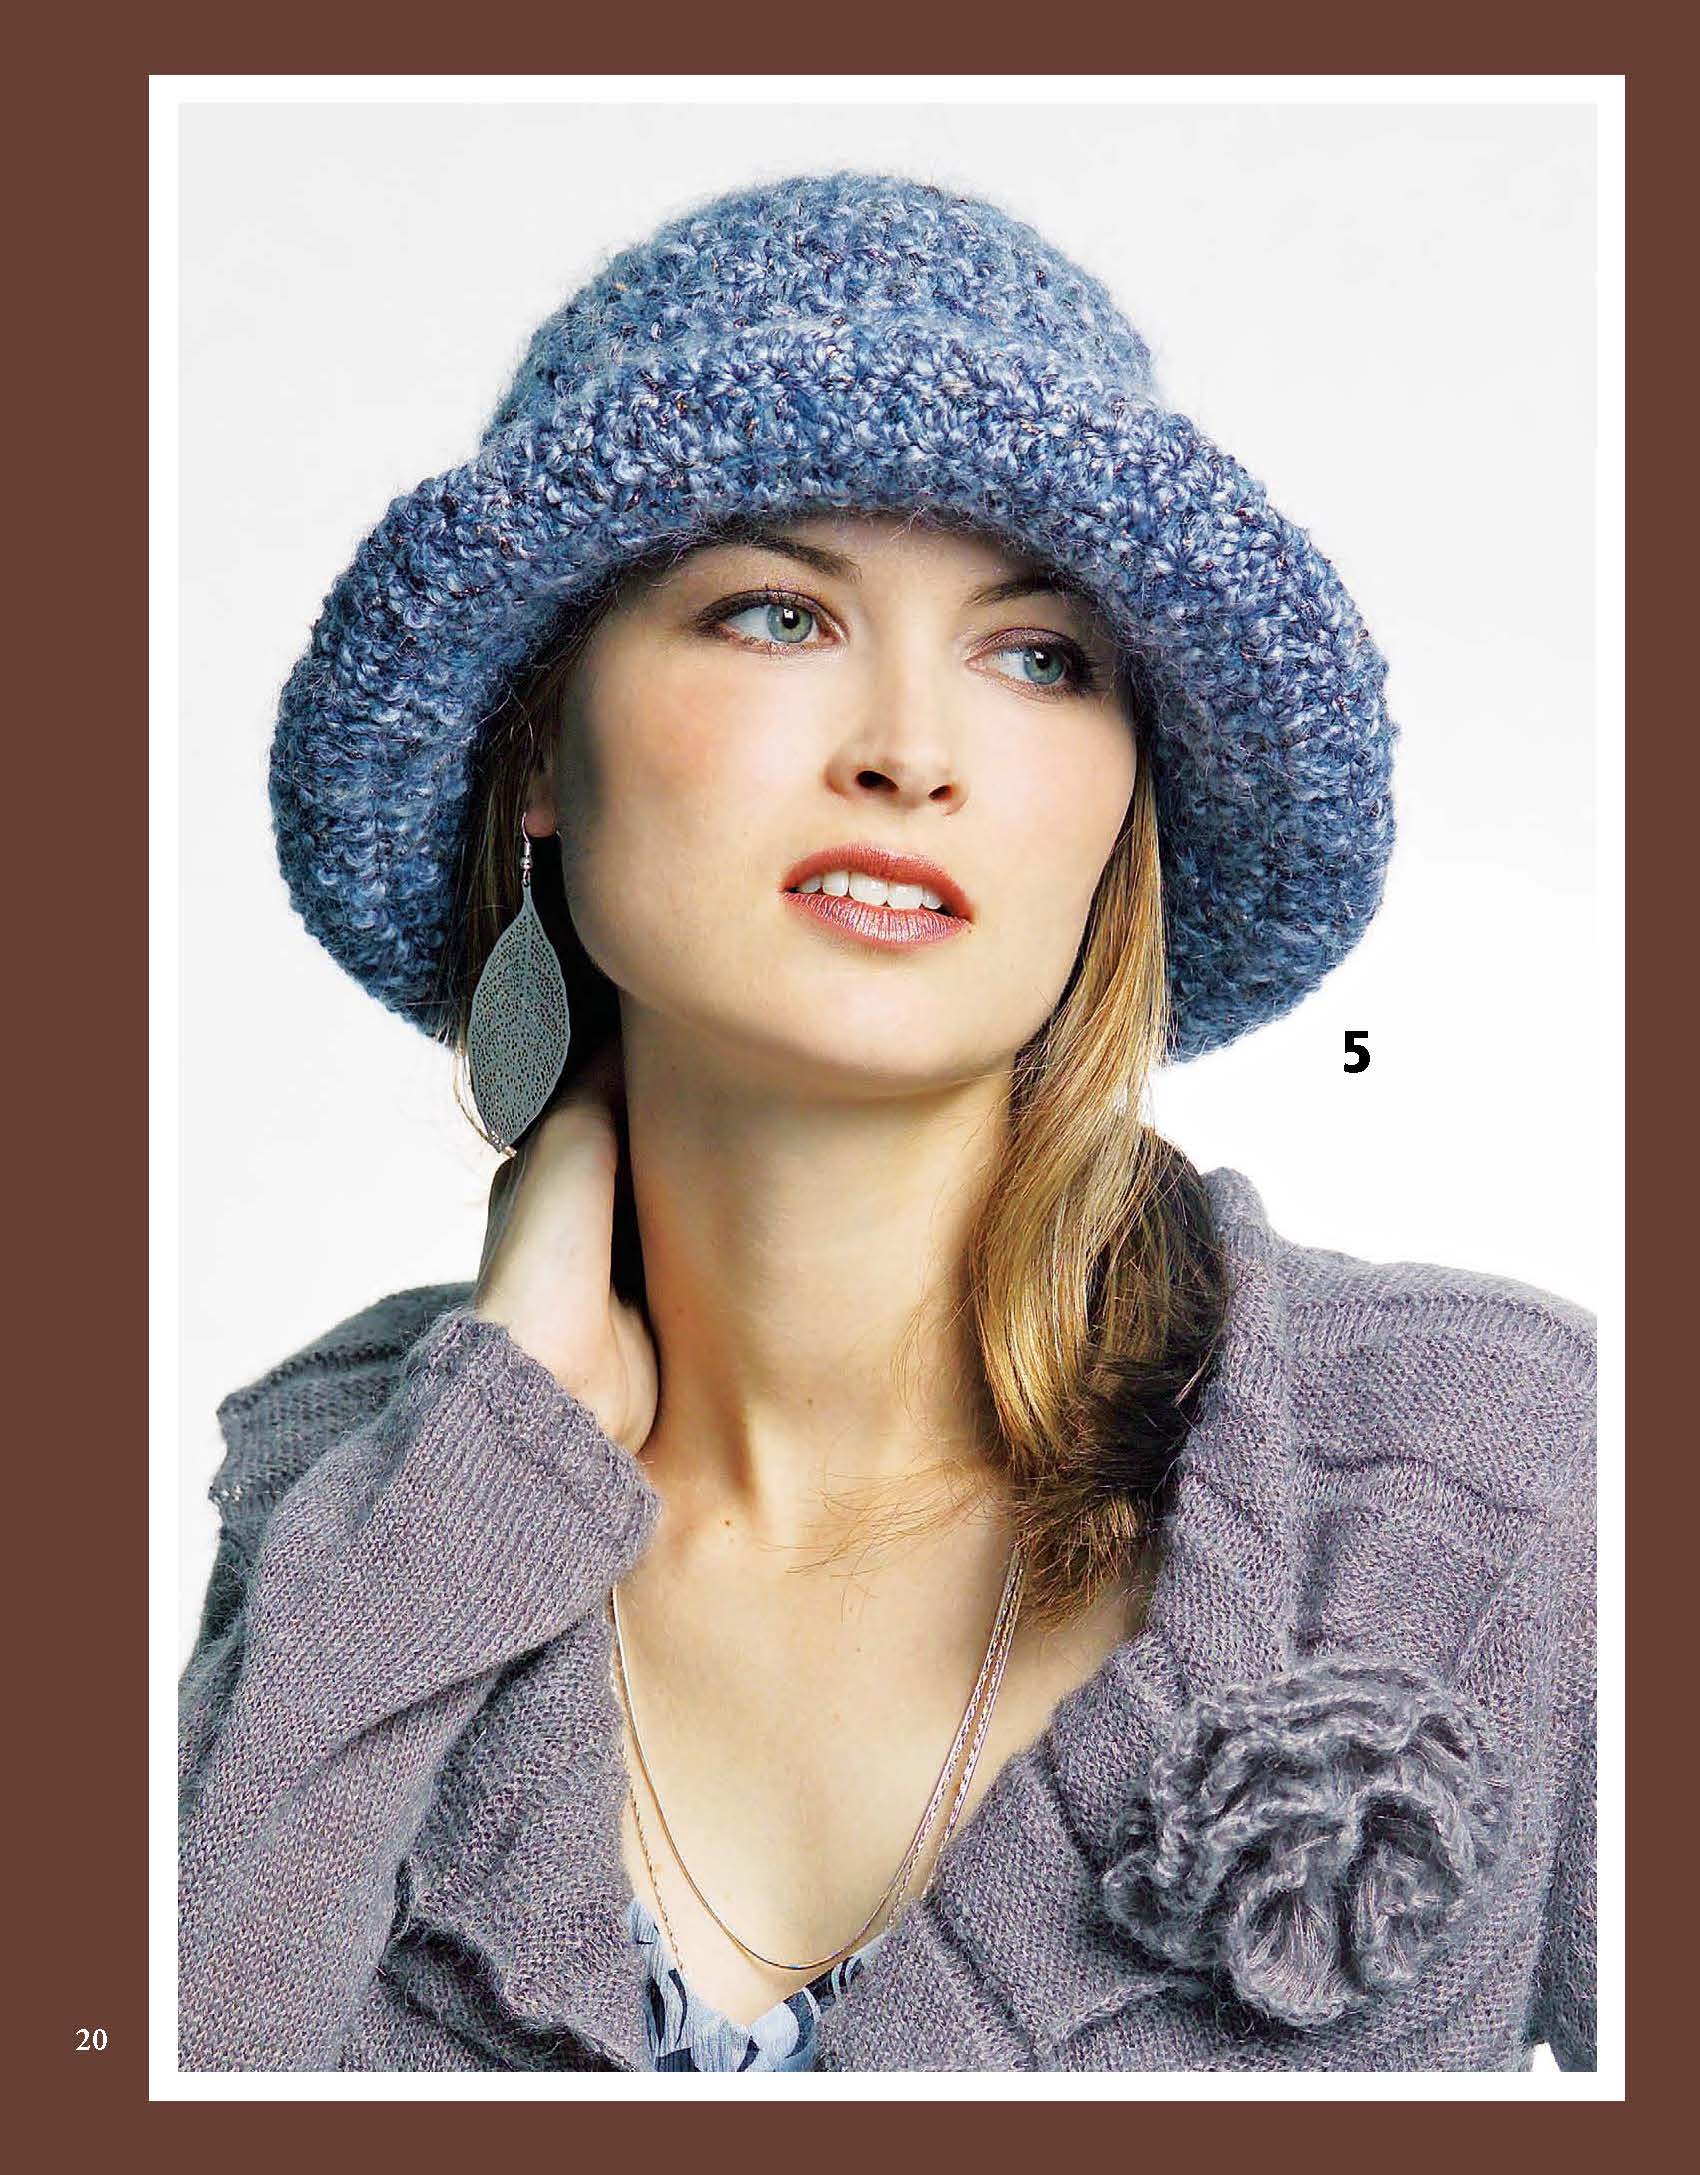 Hats for the Family Knitting Book Leisure Arts New Book 